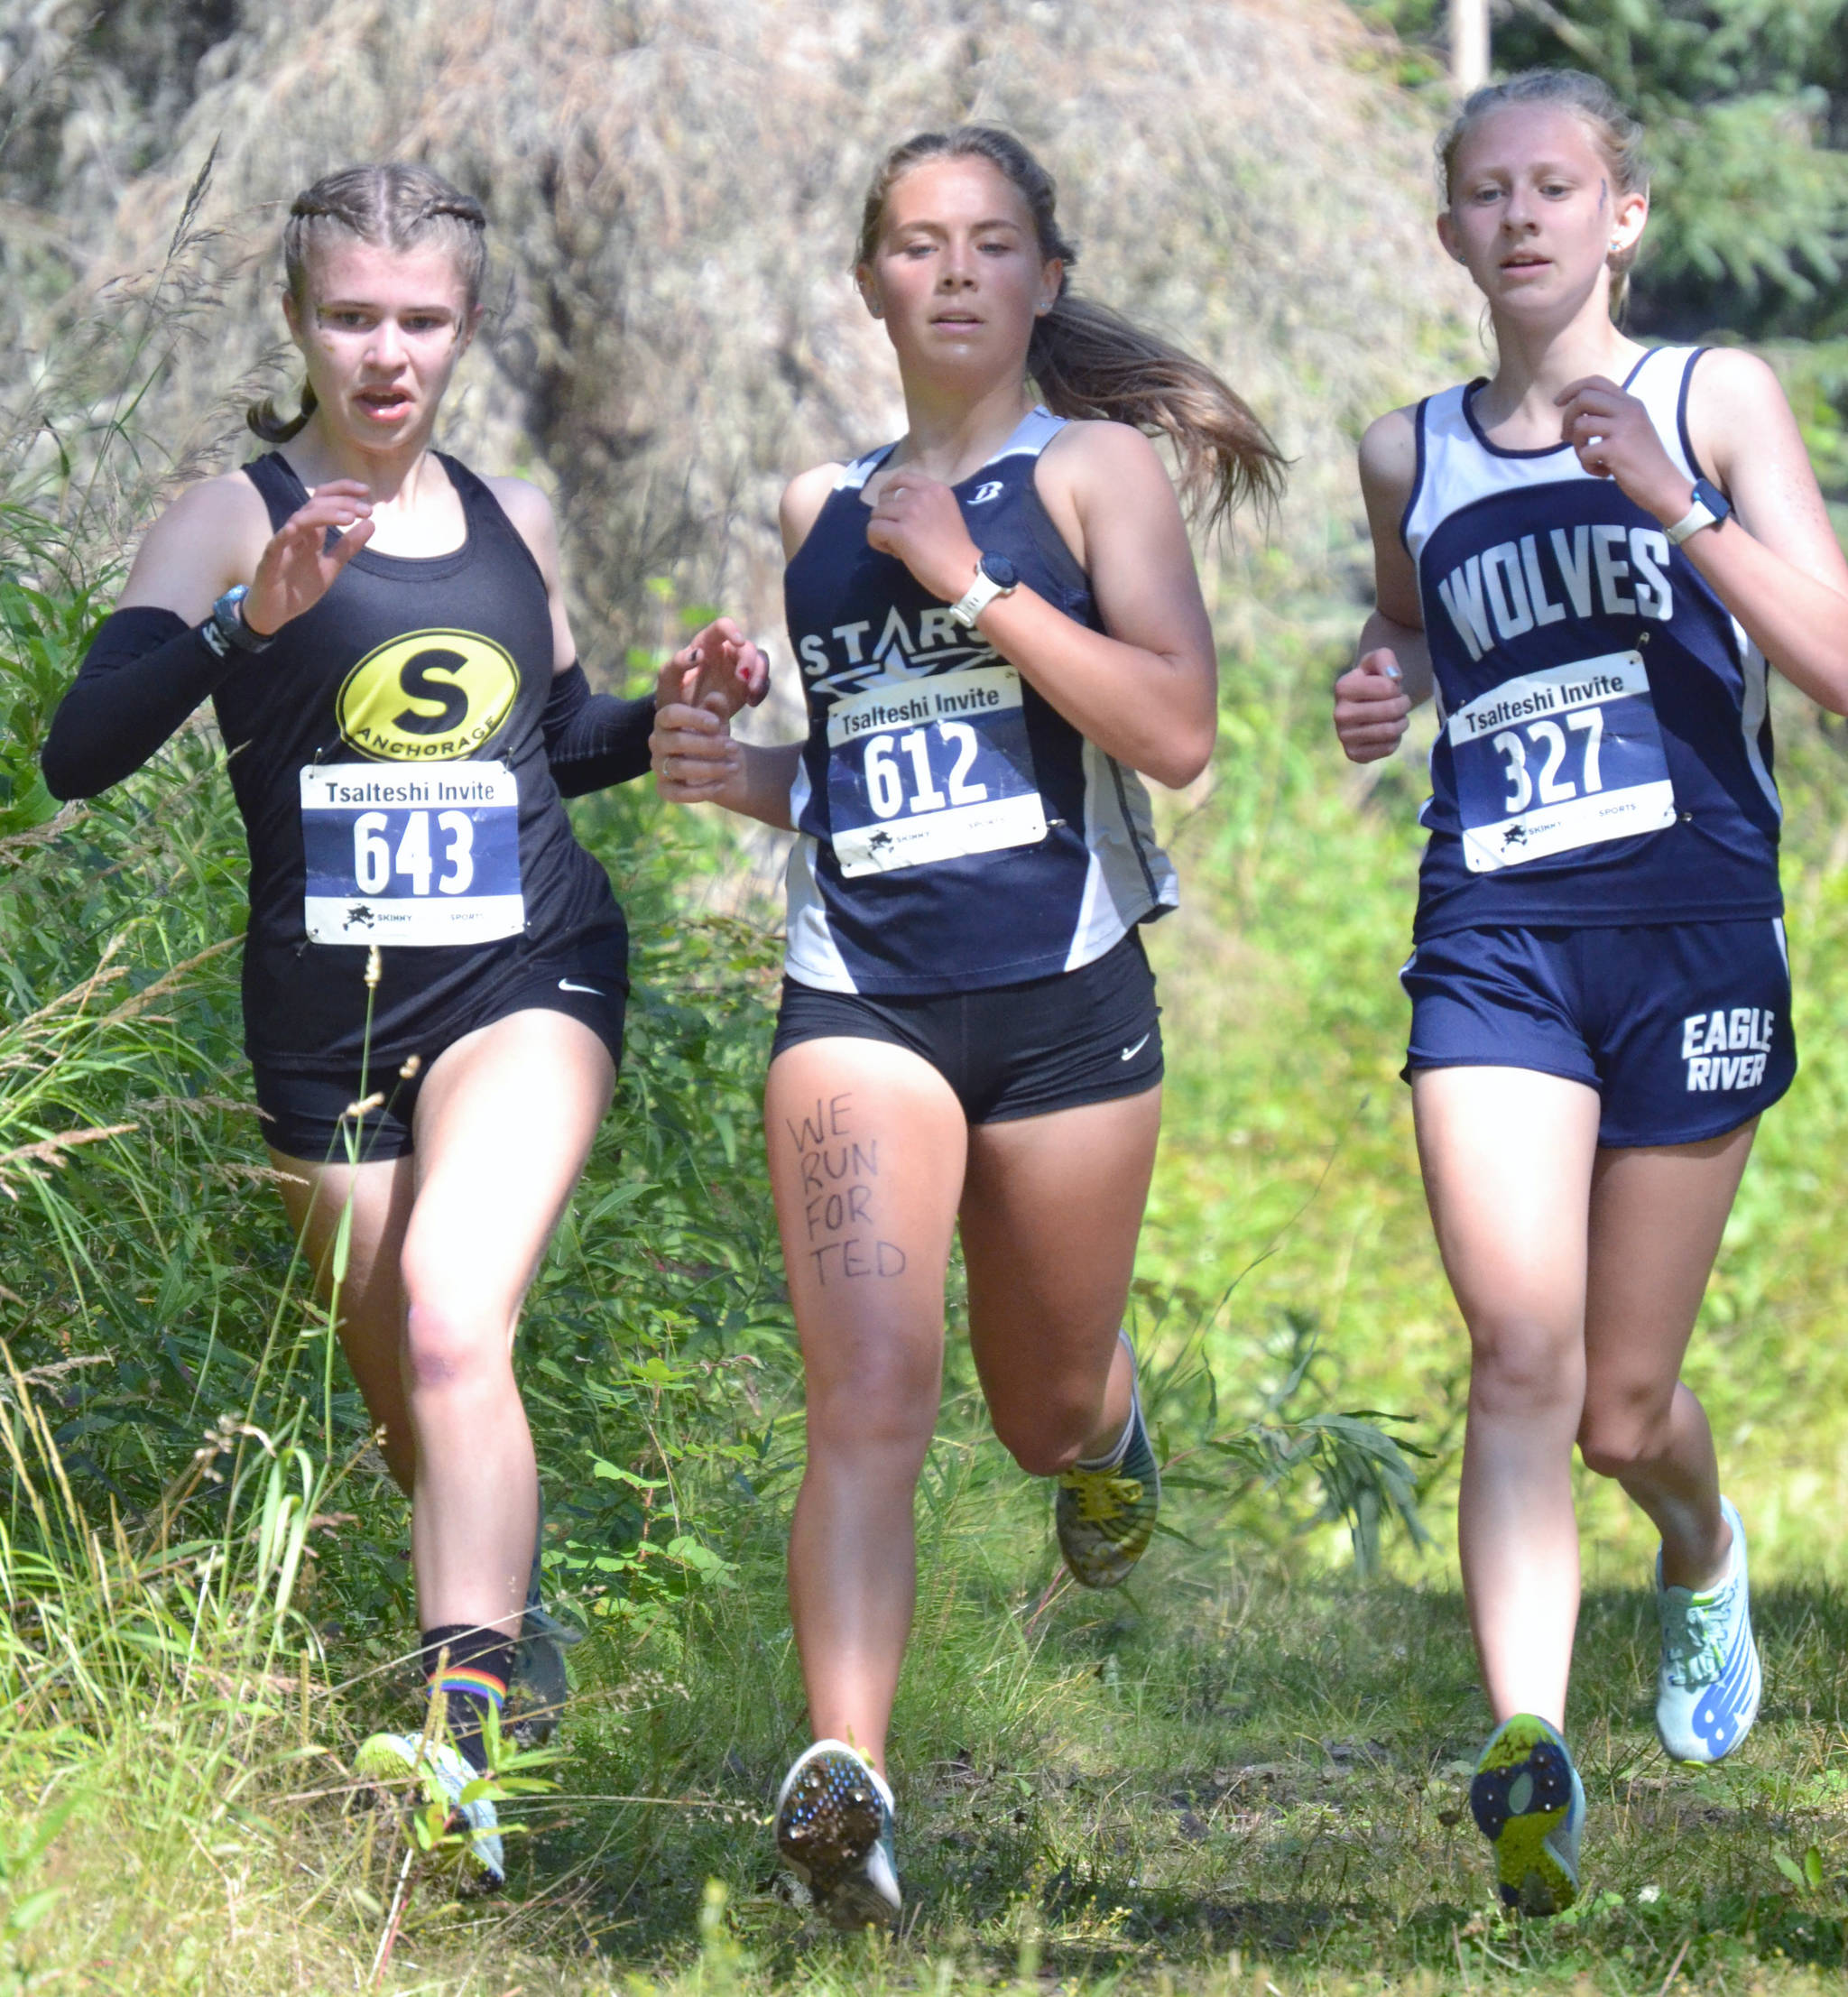 Soldotna’s Jordan Strausbaugh races to 17th place in the girls varsity race at the Ted McKenney XC Invitational on Saturday, Aug. 21, 2021, at Tsalteshi Trails just outside of Soldotna, Alaska. “We run for Ted” is written on Strausbaugh’s thigh in honor of former Soldotna coach Ted McKenney. Strausbaugh runs with South’s Elizabeth Page and Eagle River’s Ava Trembath. (Photo by Jeff Helminiak/Peninsula Clarion)